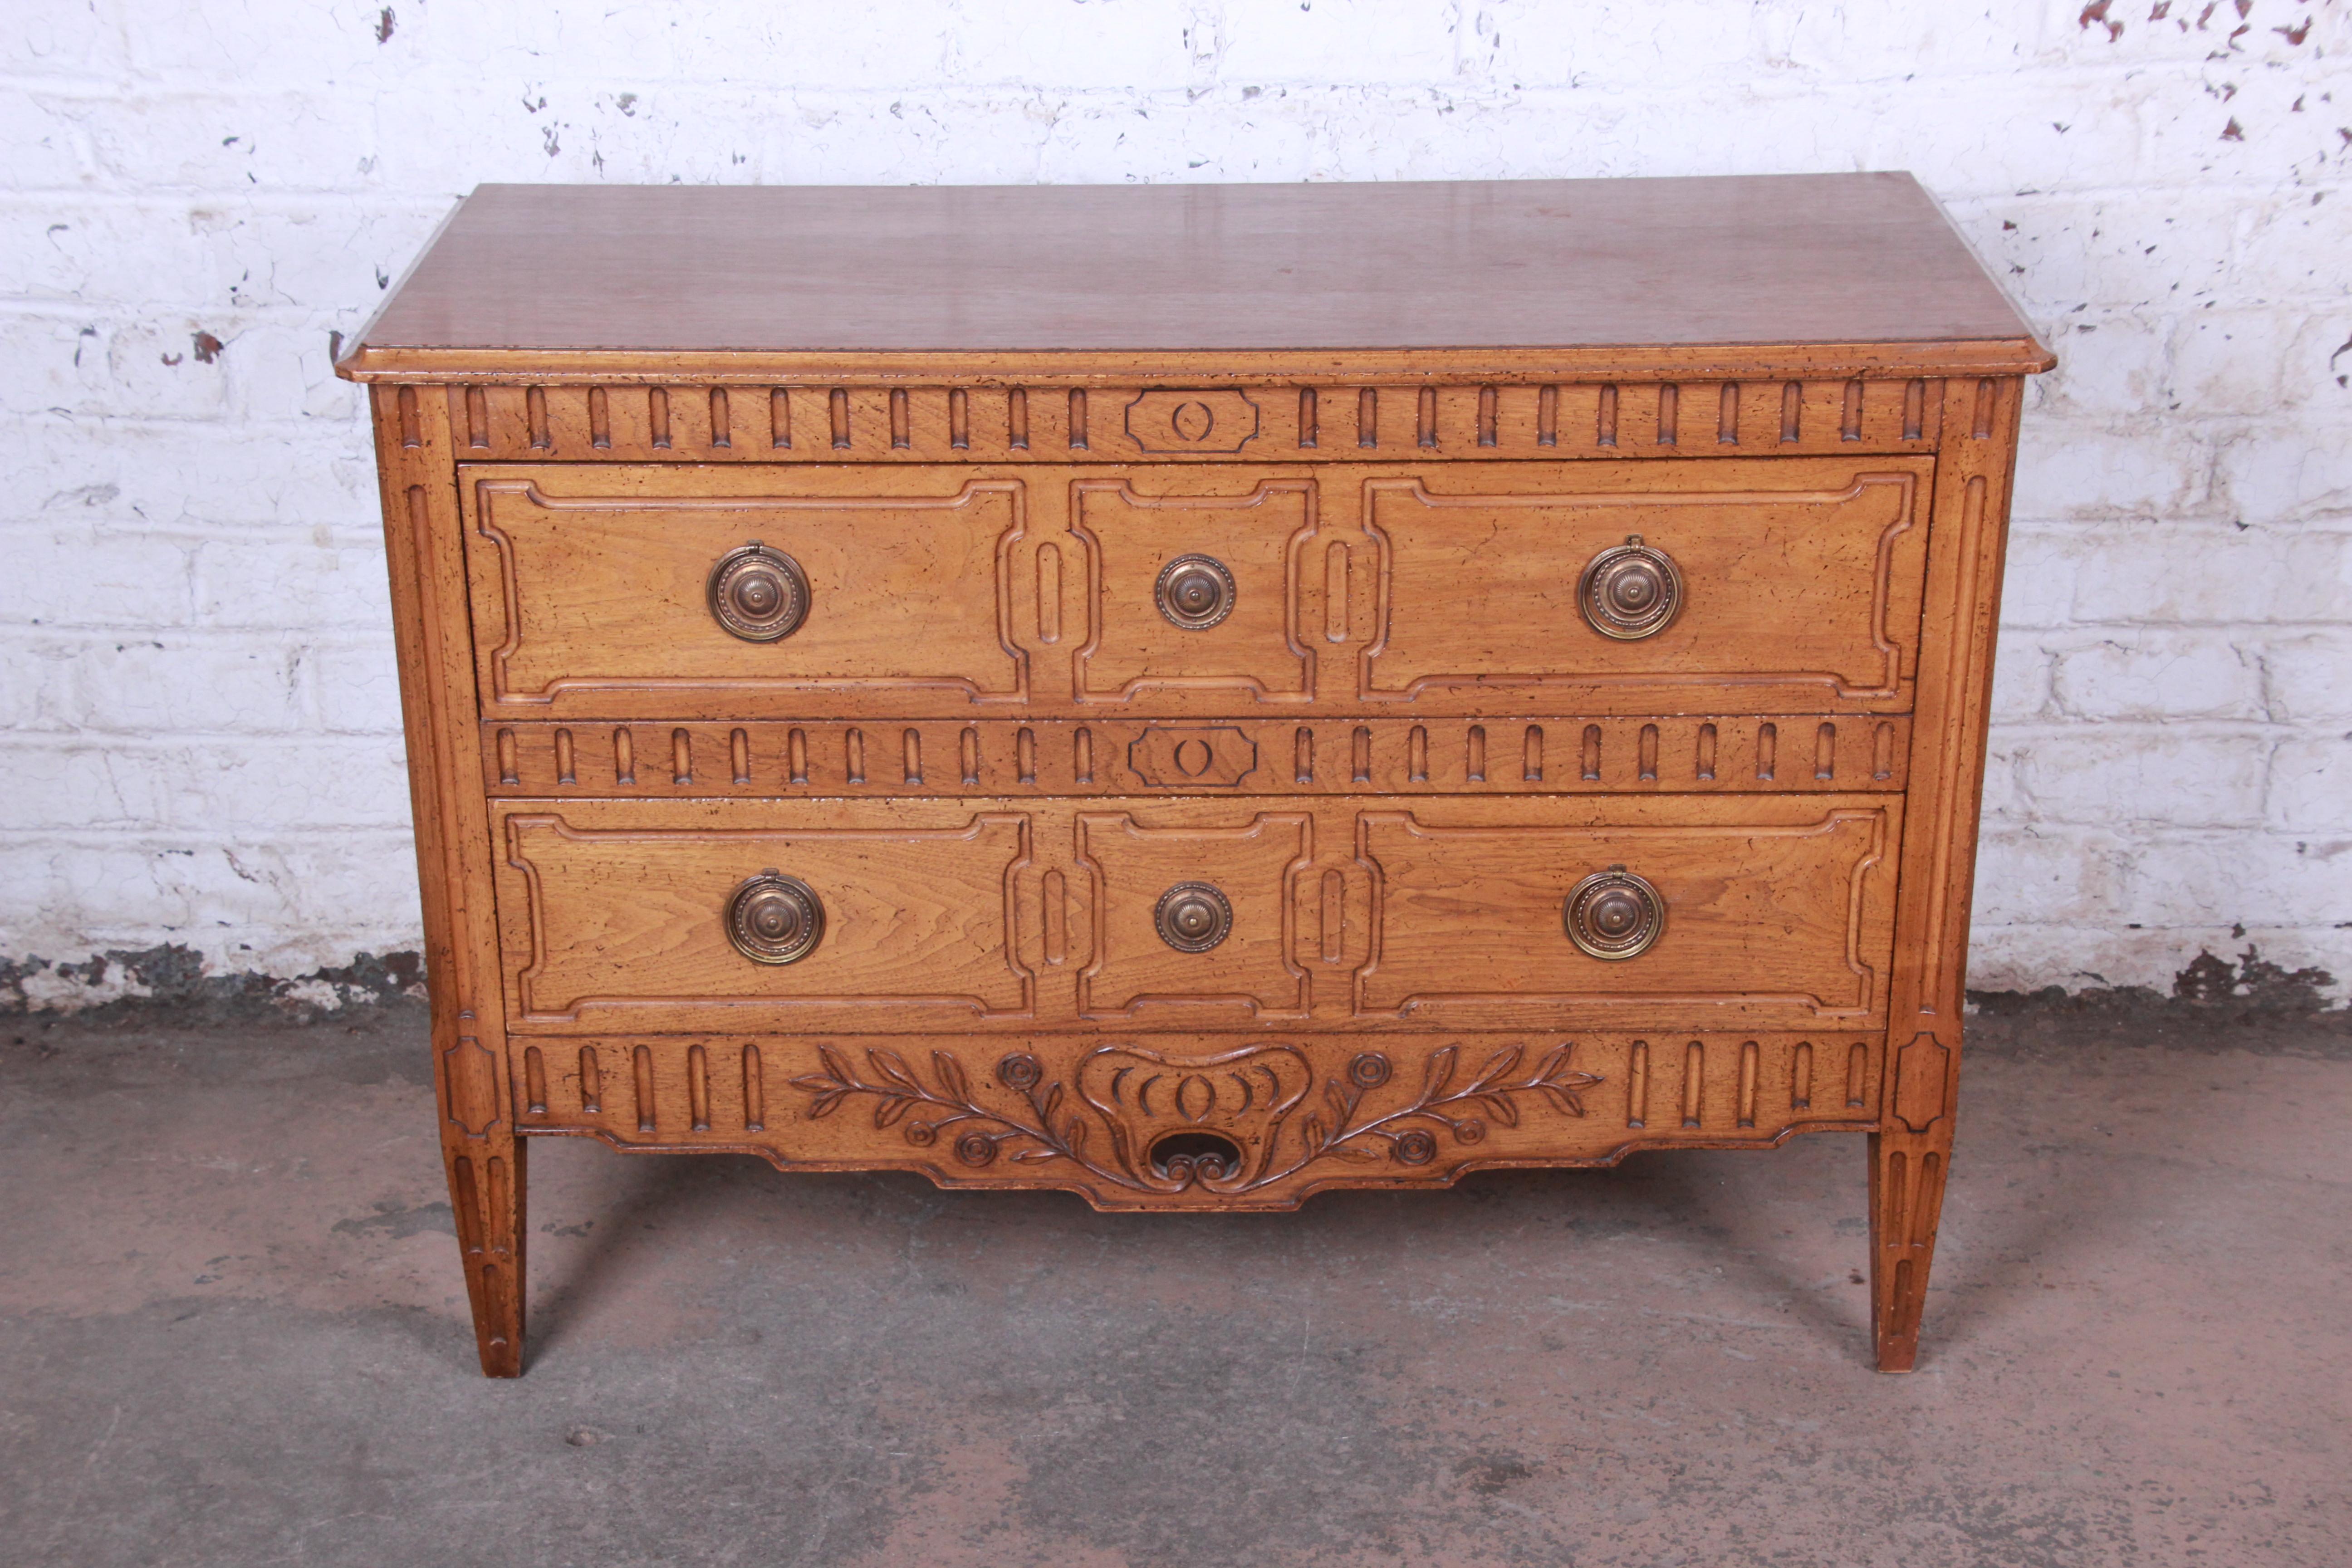 Offering a very nice vintage French Regency dresser by Bodart. The dresser offers two large smooth sliding drawers with original brass ring pulls. It has nice French carved floral details with Regency styled tapered legs. The piece is in very good